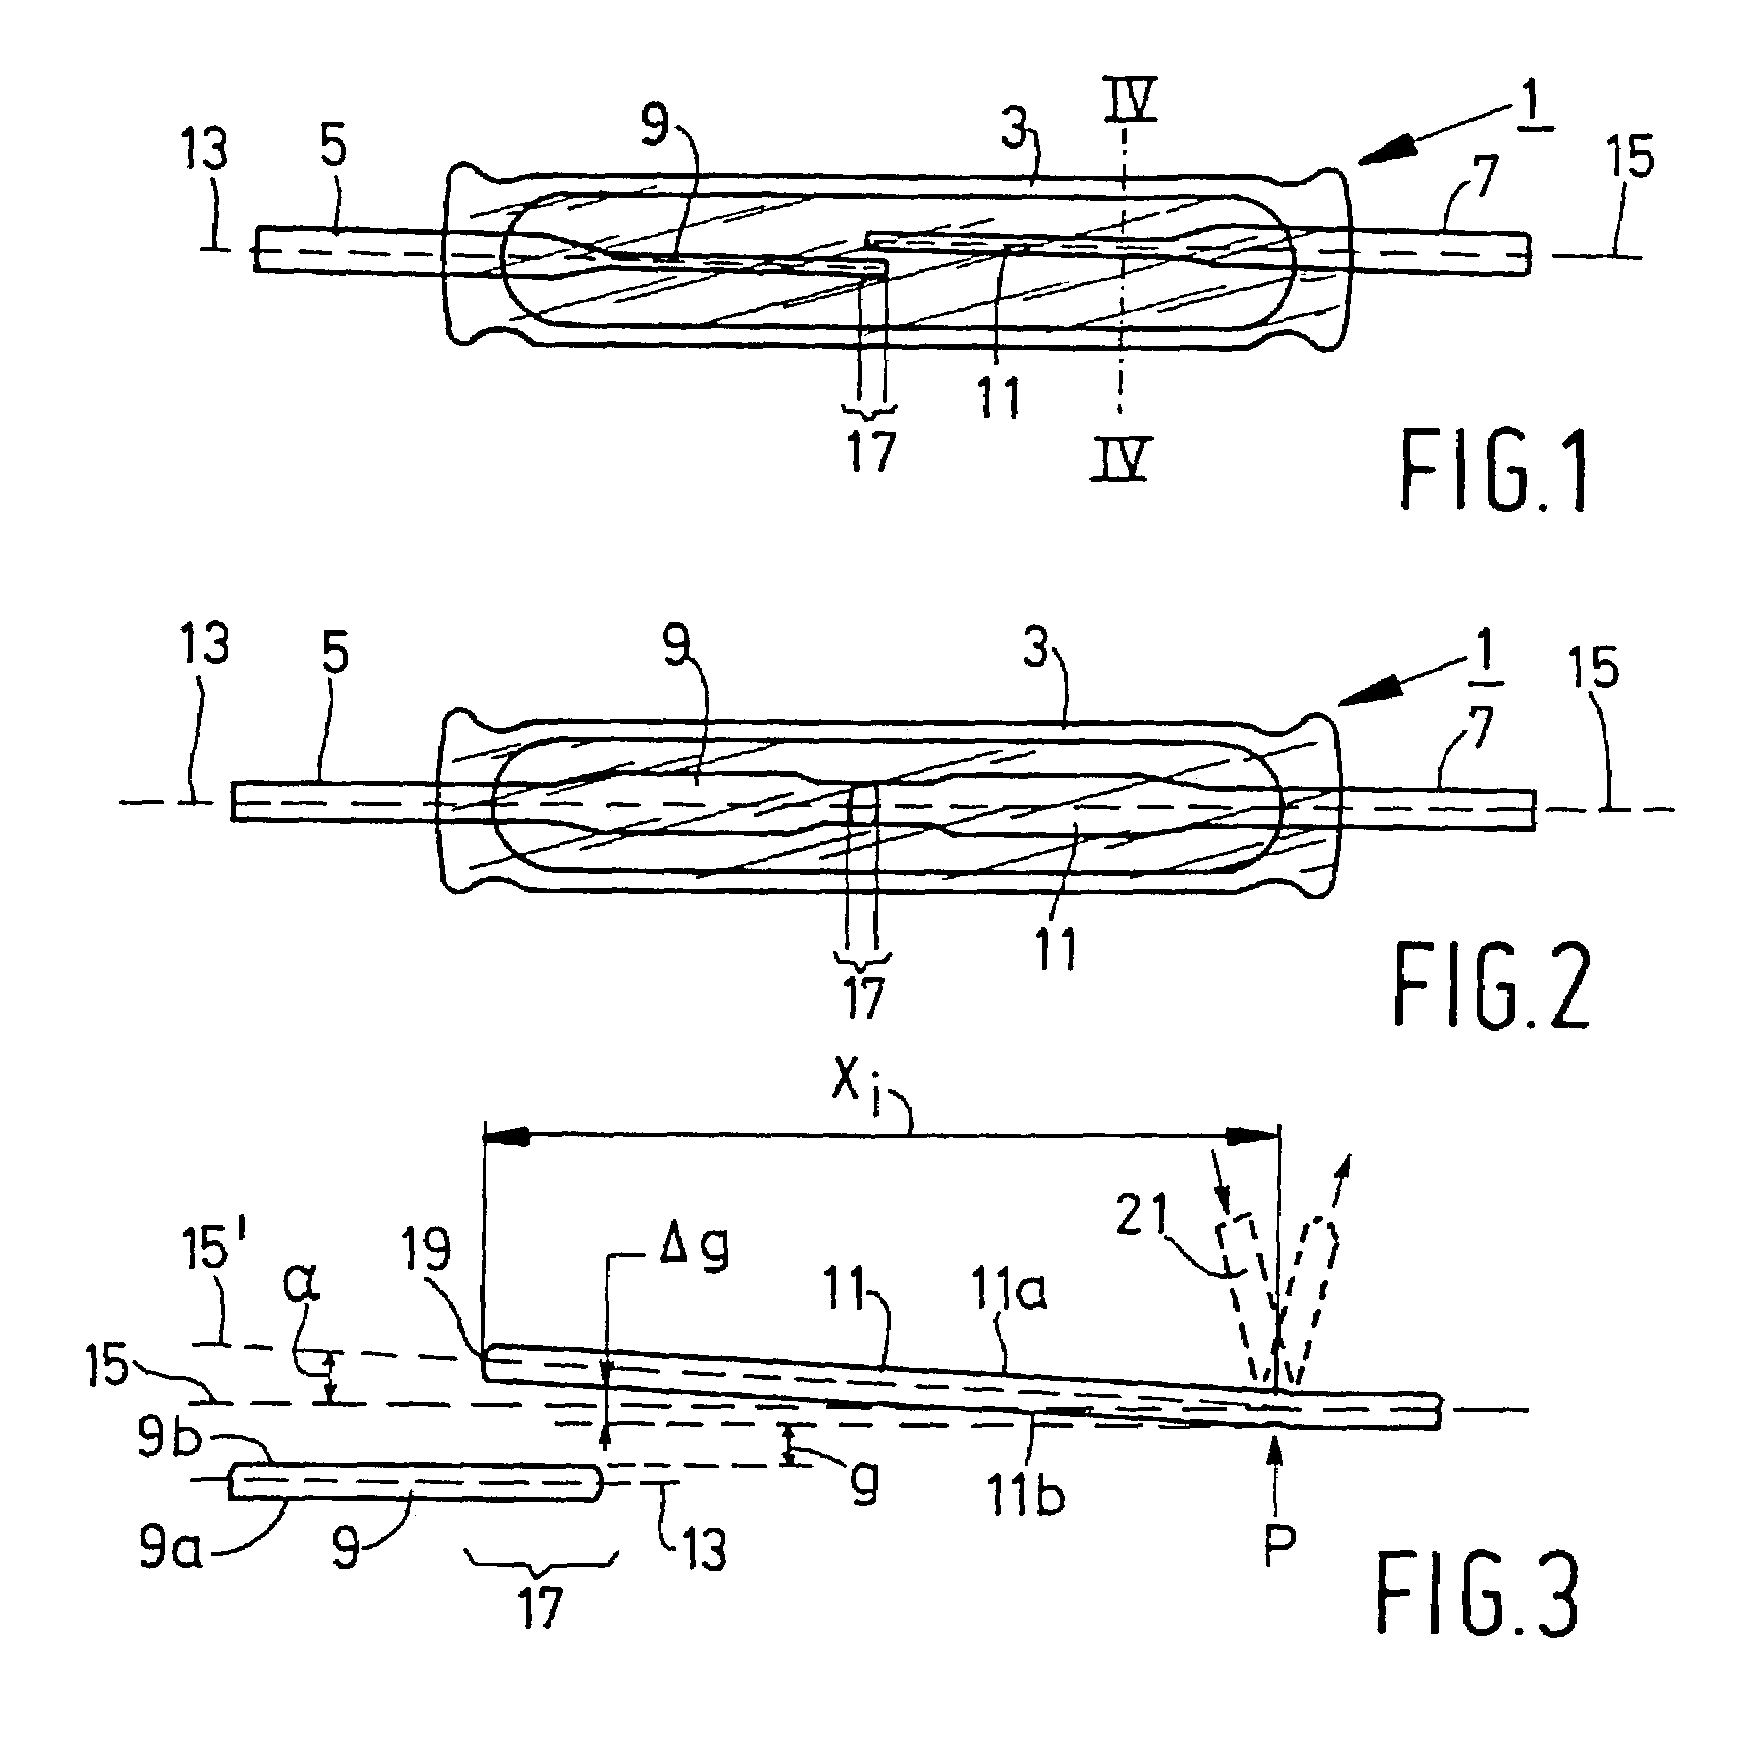 Method for adjusting the switch-gap between the contact tongues of a reeds switch